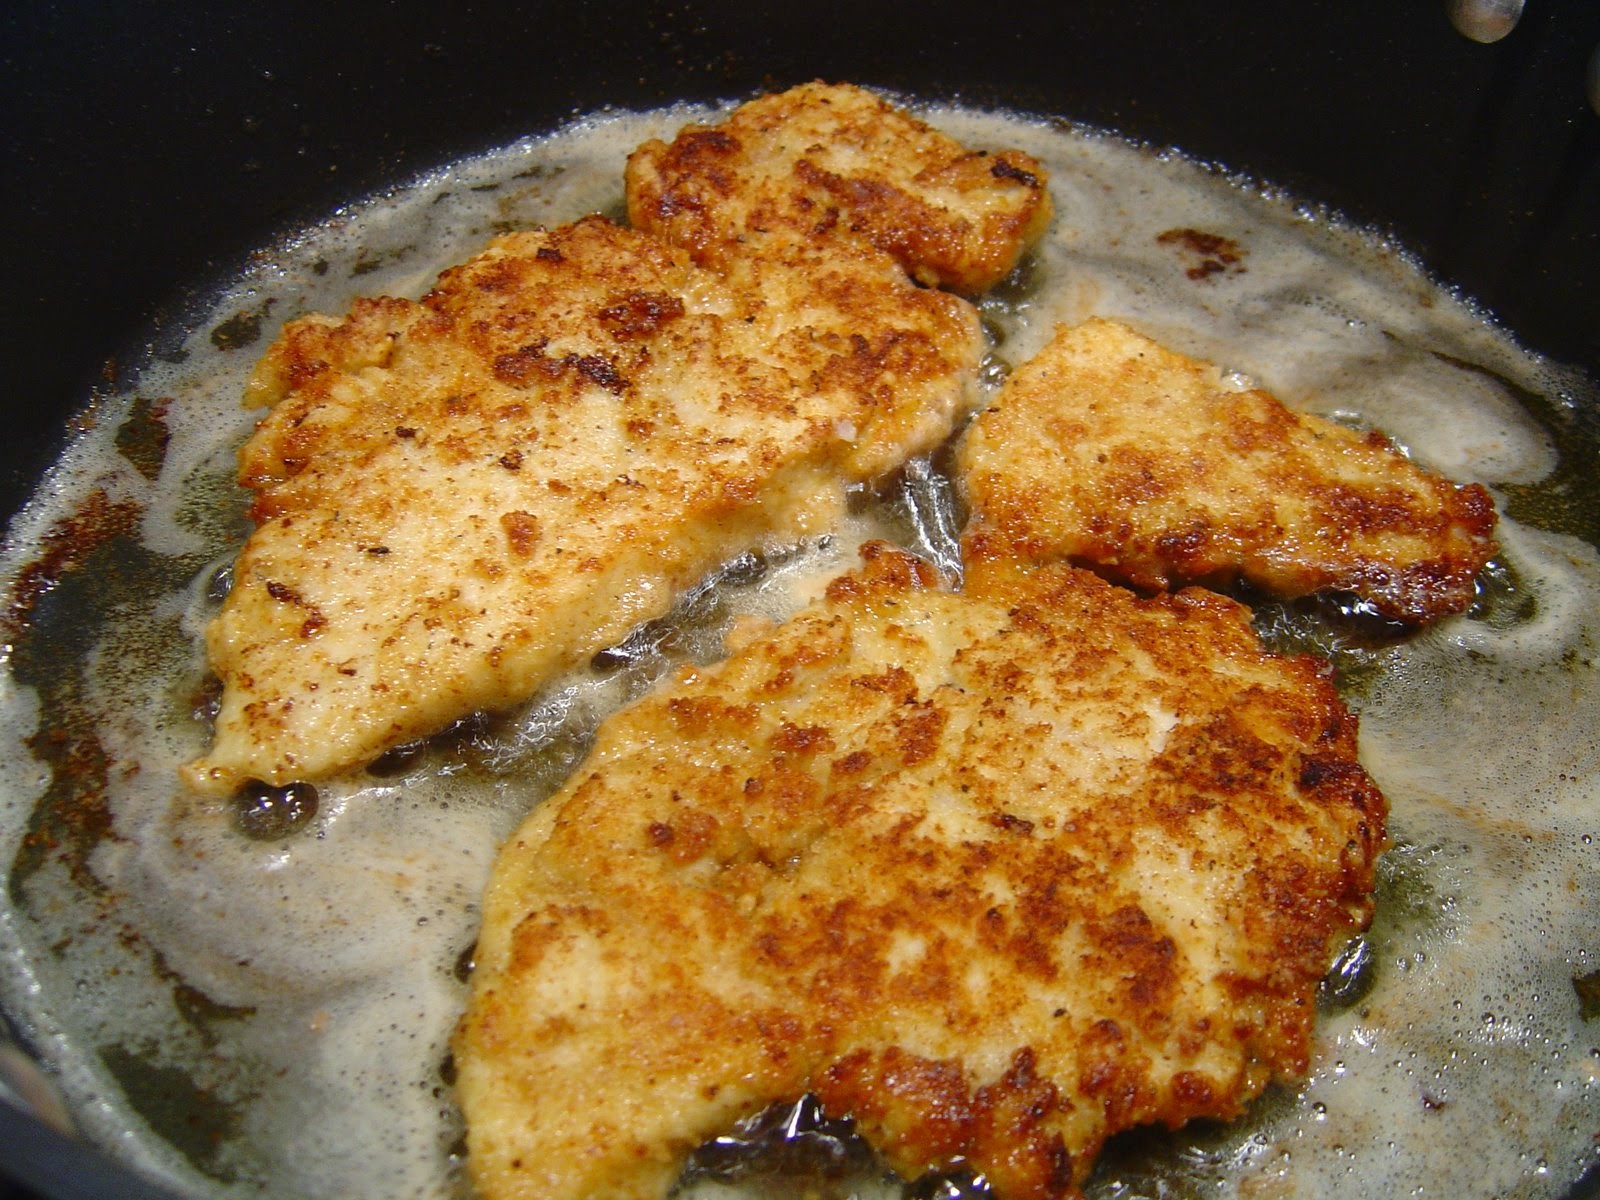 What is a recipe for baked boneless, skinless chicken breast?